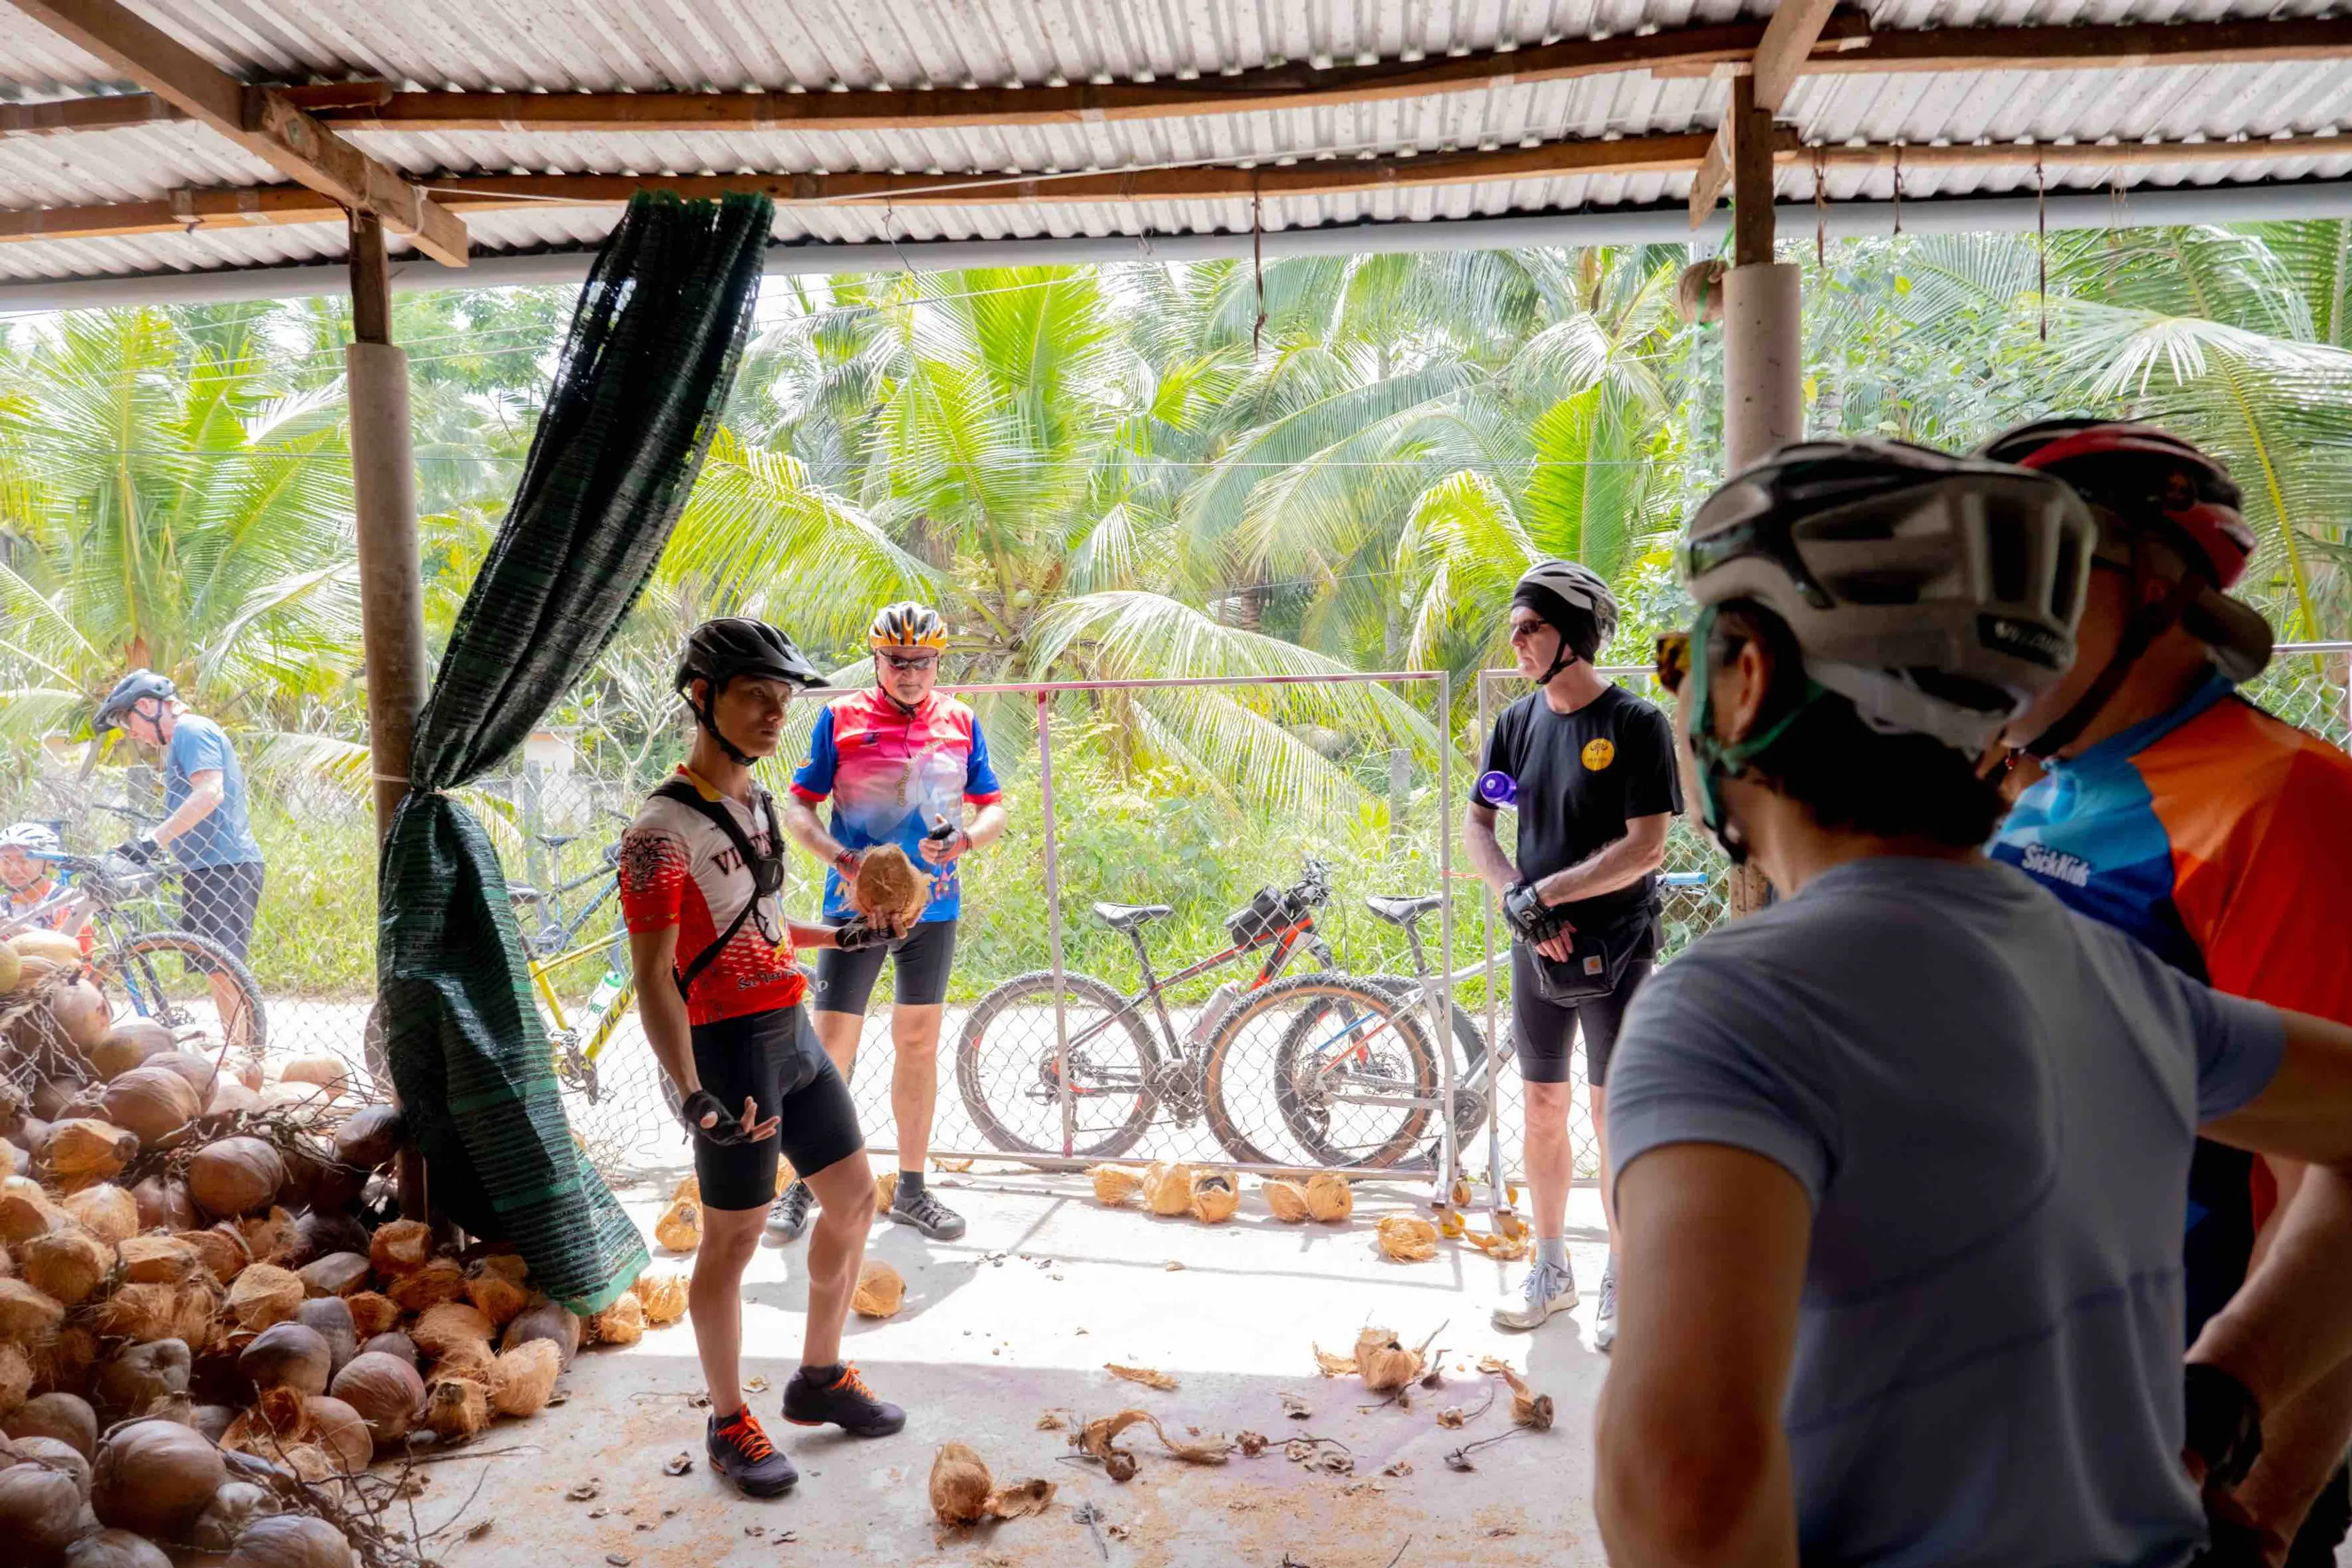 Our Mekong Bike Trips always stop at a local coconut farm for relaxing and enjoy truth "Mekong Cuisine"